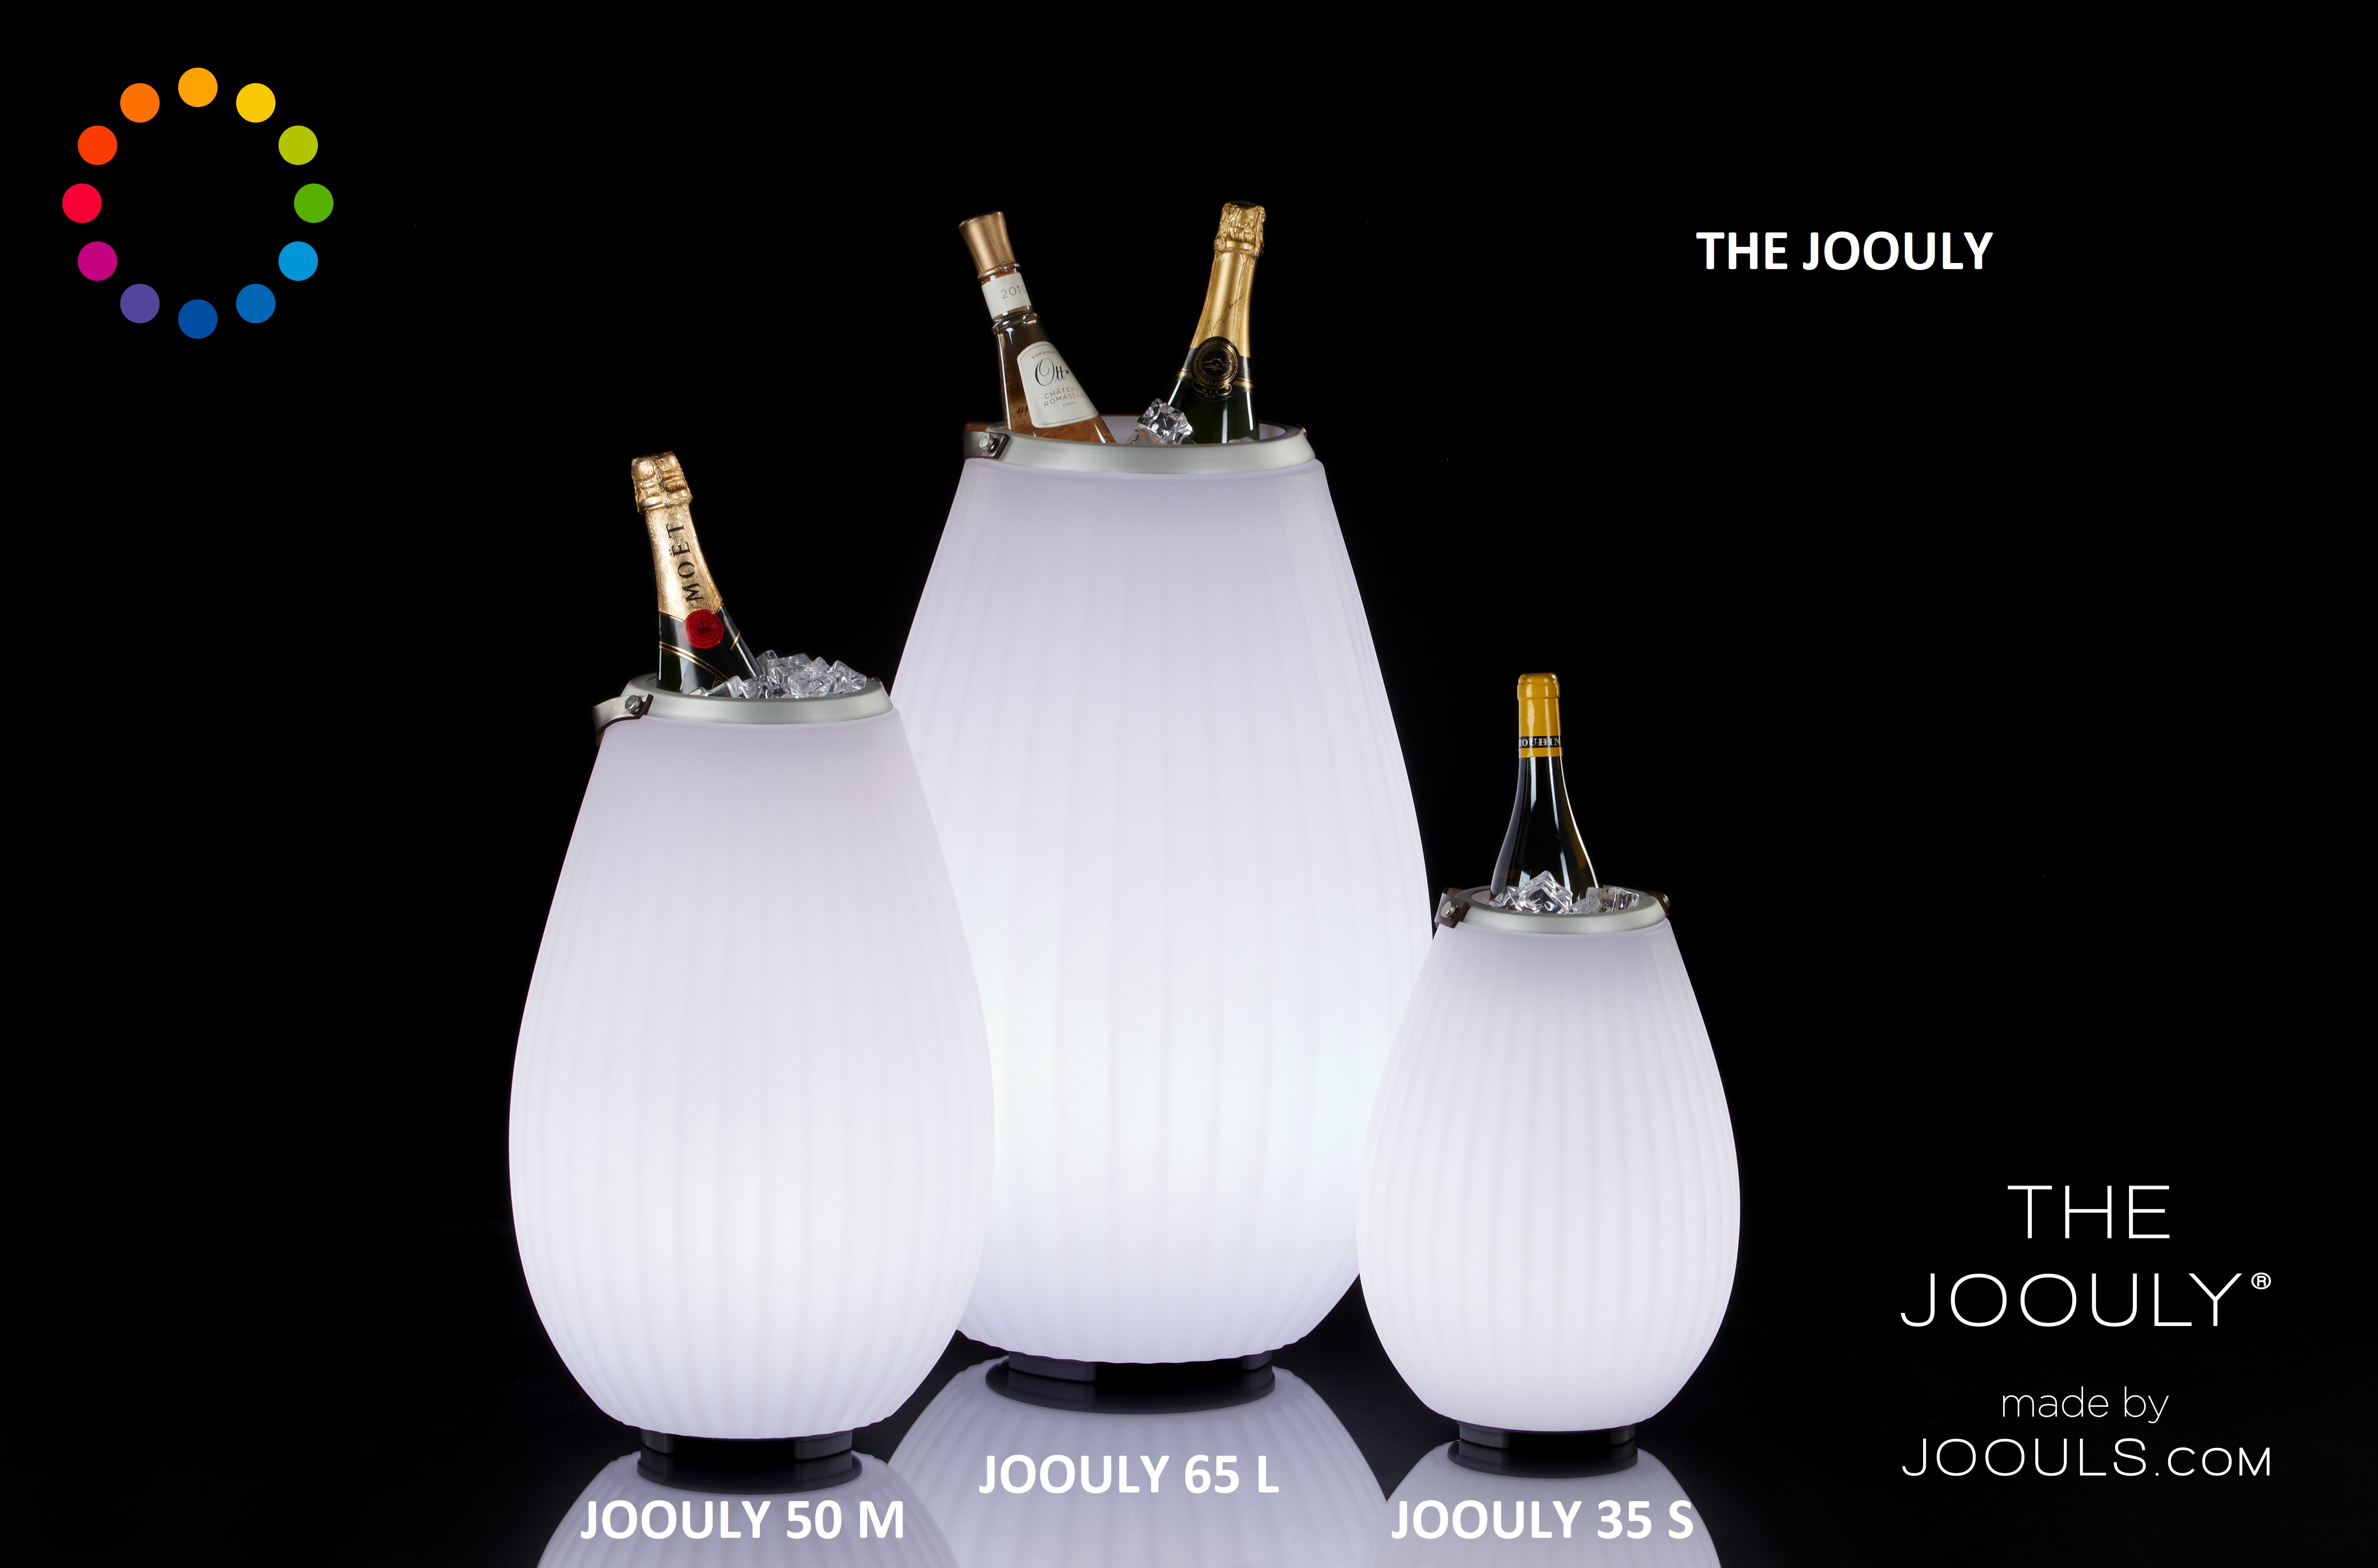 The Joouly 35